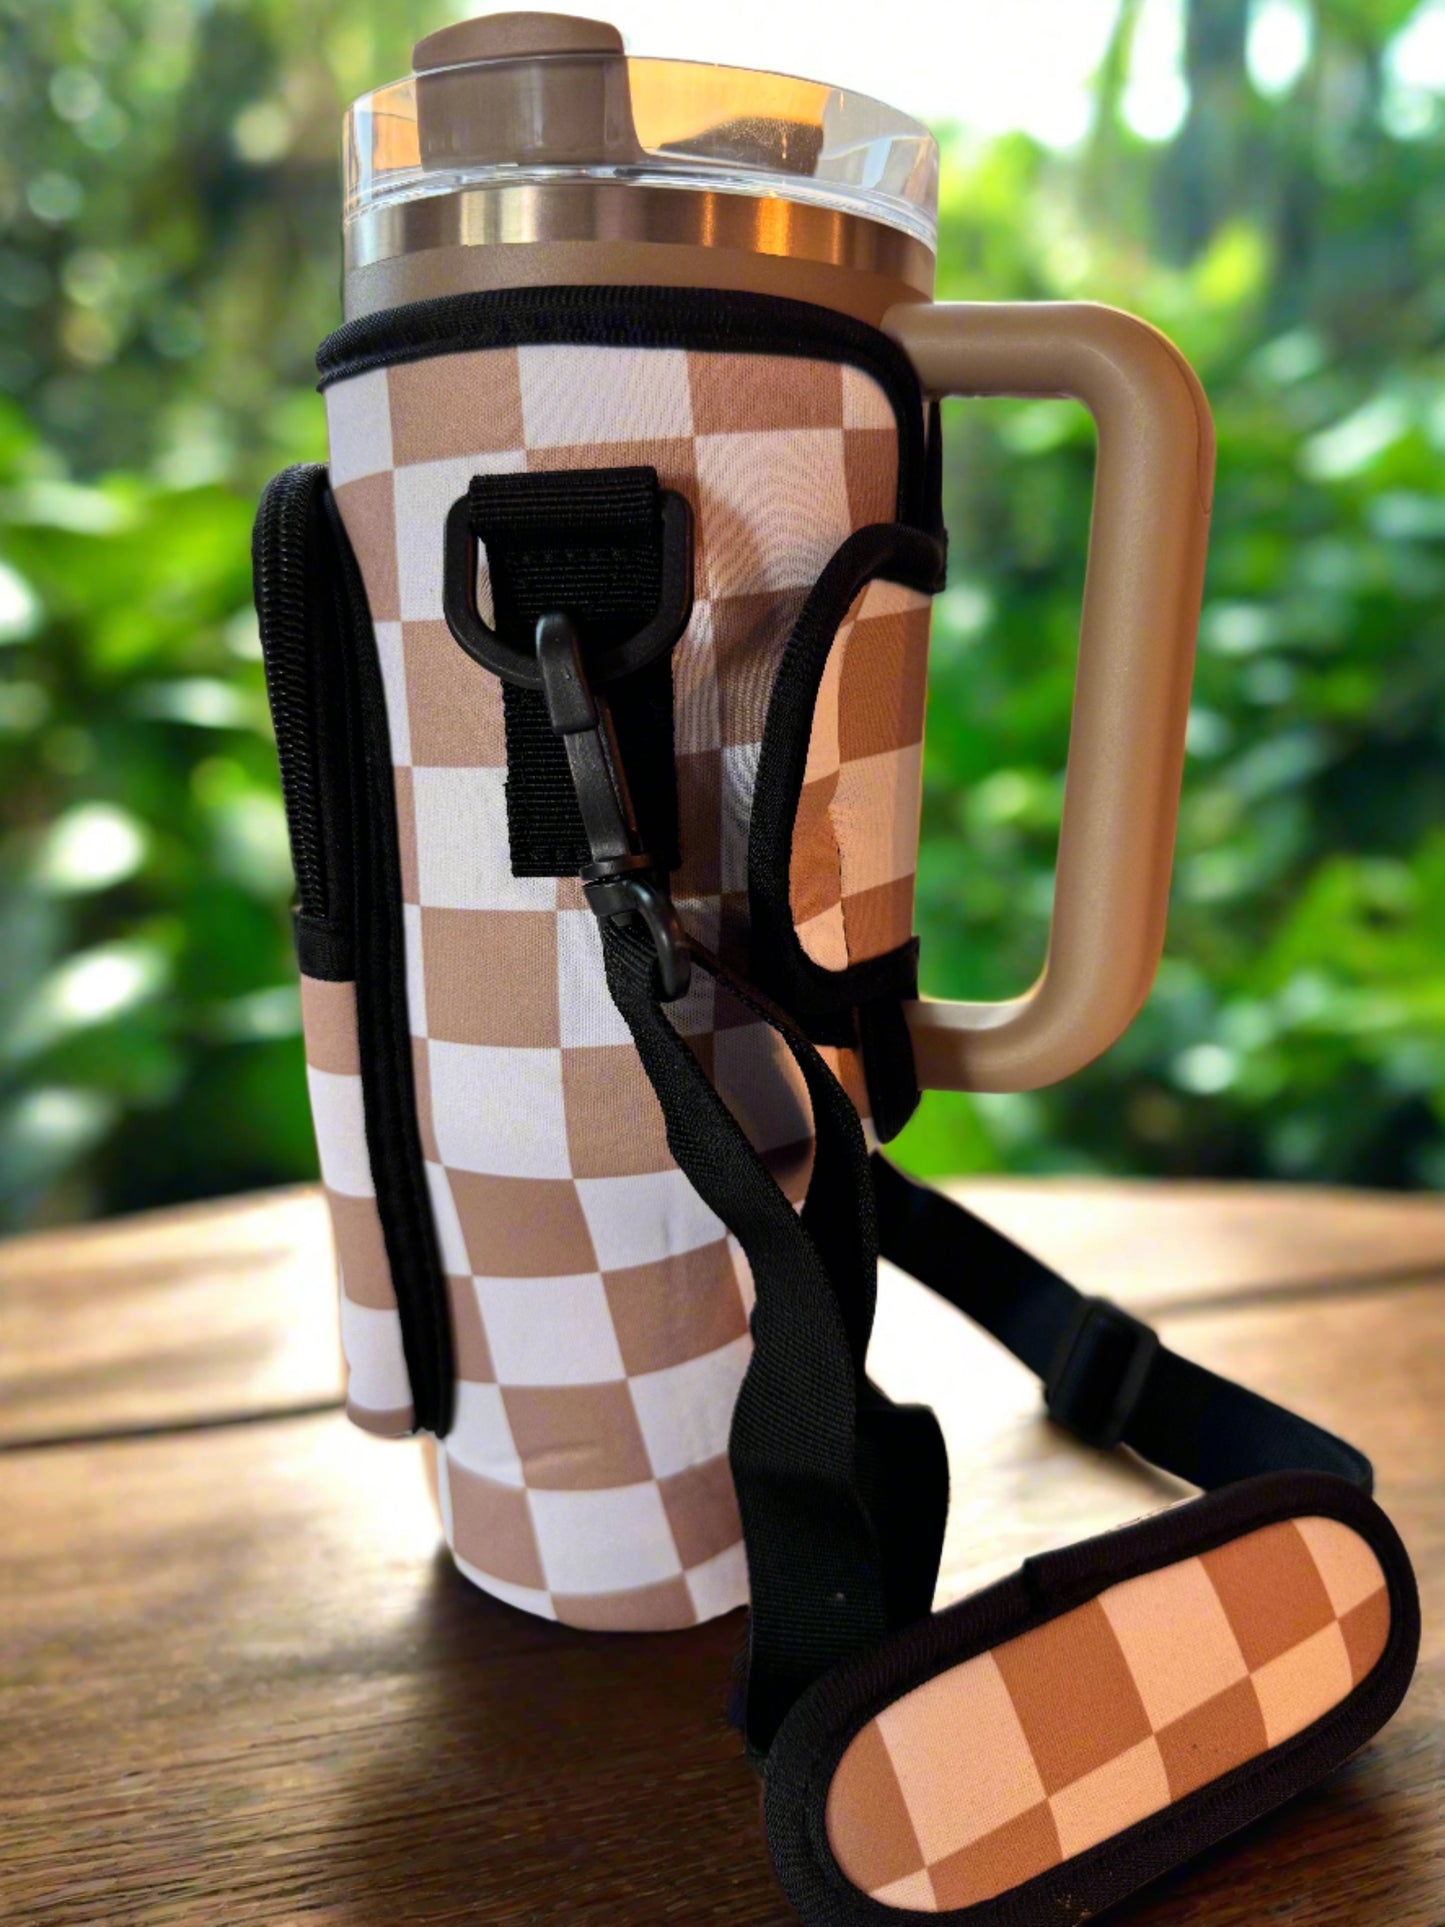 Tan Checkers Carrier with Phone Pocket | 30oz & 40oz